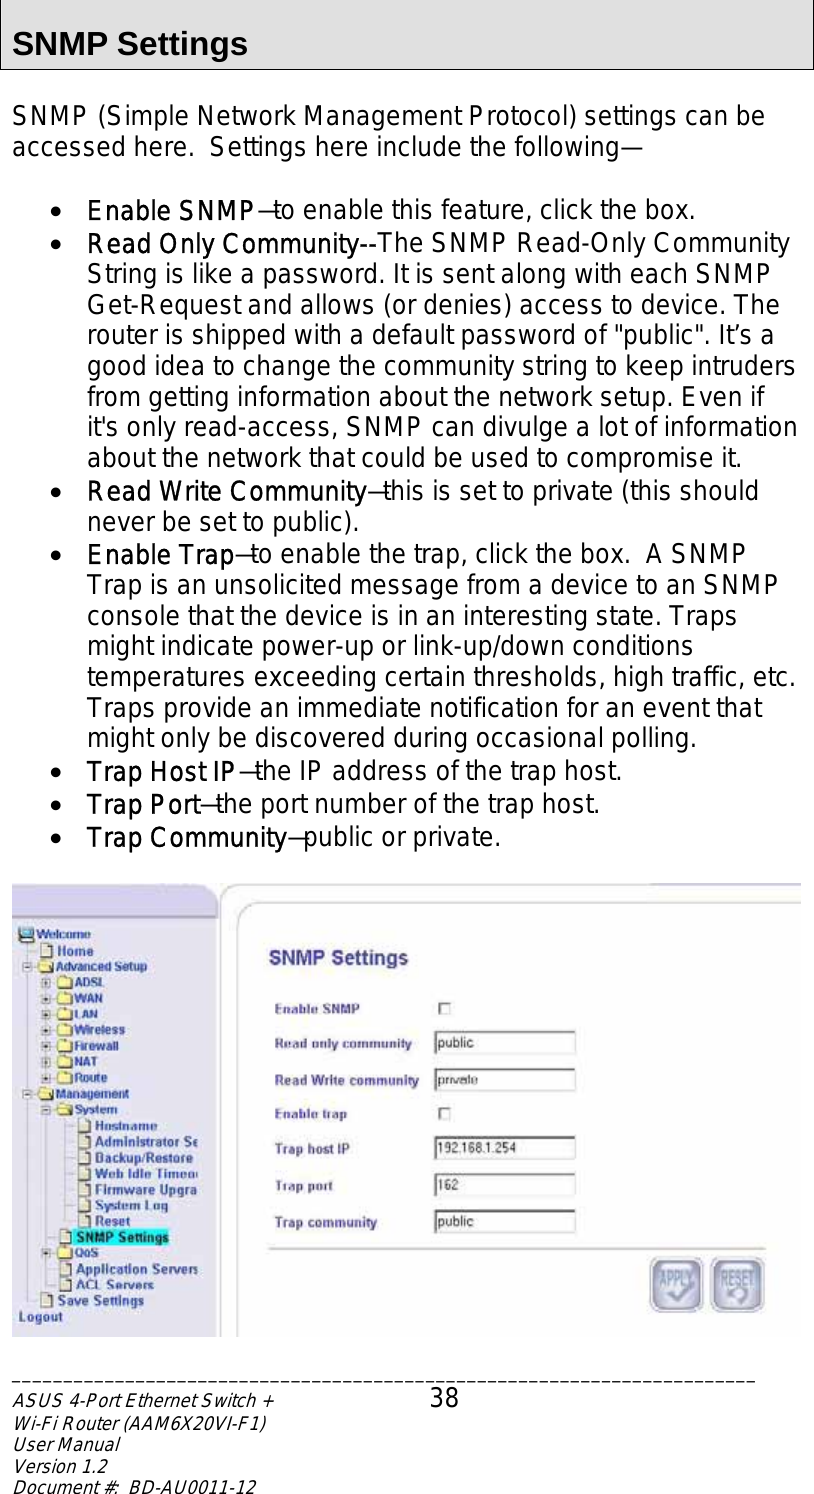  SNMP Settings  SNMP (Simple Network Management Protocol) settings can be accessed here.  Settings here include the following—  •  Enable SNMP—to enable this feature, click the box. •  Read Only Community--The SNMP Read-Only Community String is like a password. It is sent along with each SNMP Get-Request and allows (or denies) access to device. The router is shipped with a default password of &quot;public&quot;. It’s a good idea to change the community string to keep intruders from getting information about the network setup. Even if it&apos;s only read-access, SNMP can divulge a lot of information about the network that could be used to compromise it. •  Read Write Community—this is set to private (this should never be set to public). •  Enable Trap—to enable the trap, click the box.  A SNMP Trap is an unsolicited message from a device to an SNMP console that the device is in an interesting state. Traps might indicate power-up or link-up/down conditions temperatures exceeding certain thresholds, high traffic, etc. Traps provide an immediate notification for an event that might only be discovered during occasional polling. •  Trap Host IP—the IP address of the trap host. •  Trap Port—the port number of the trap host. •  Trap Community—public or private.   ________________________________________________________________________ASUS 4-Port Ethernet Switch +  38 Wi-Fi Router (AAM6X20VI-F1) User Manual                                                                         Version 1.2 Document #:  BD-AU0011-12  